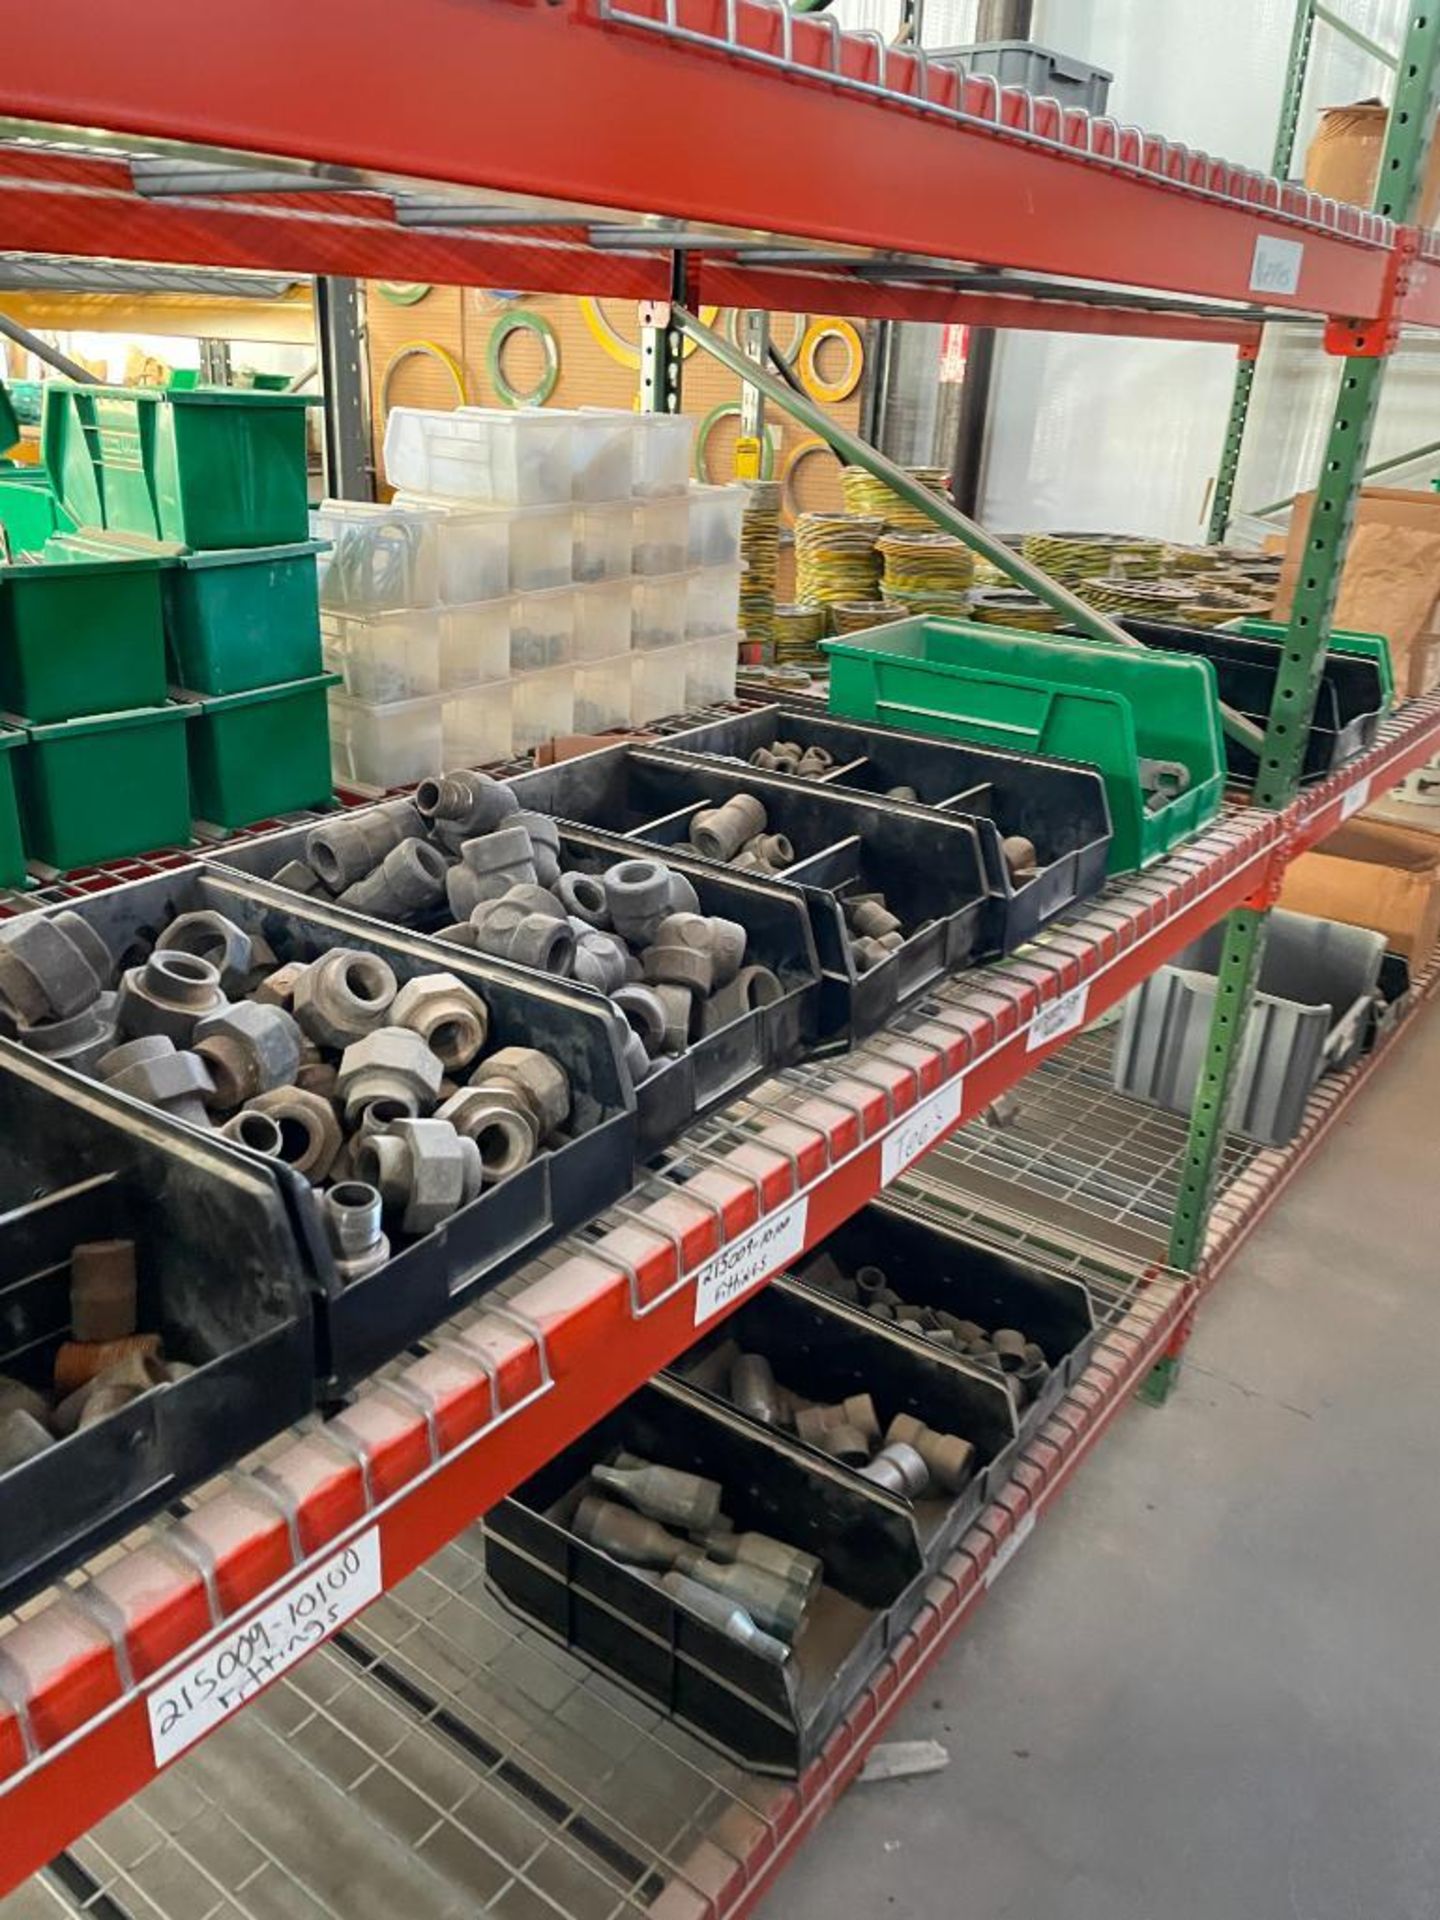 CONTENT OF SHELVING IN SHIPPING AND RECEIVING BUILDING: NEW VALVES, FLEX SEAL GASKETS, PIPE FITTINGS - Image 15 of 20